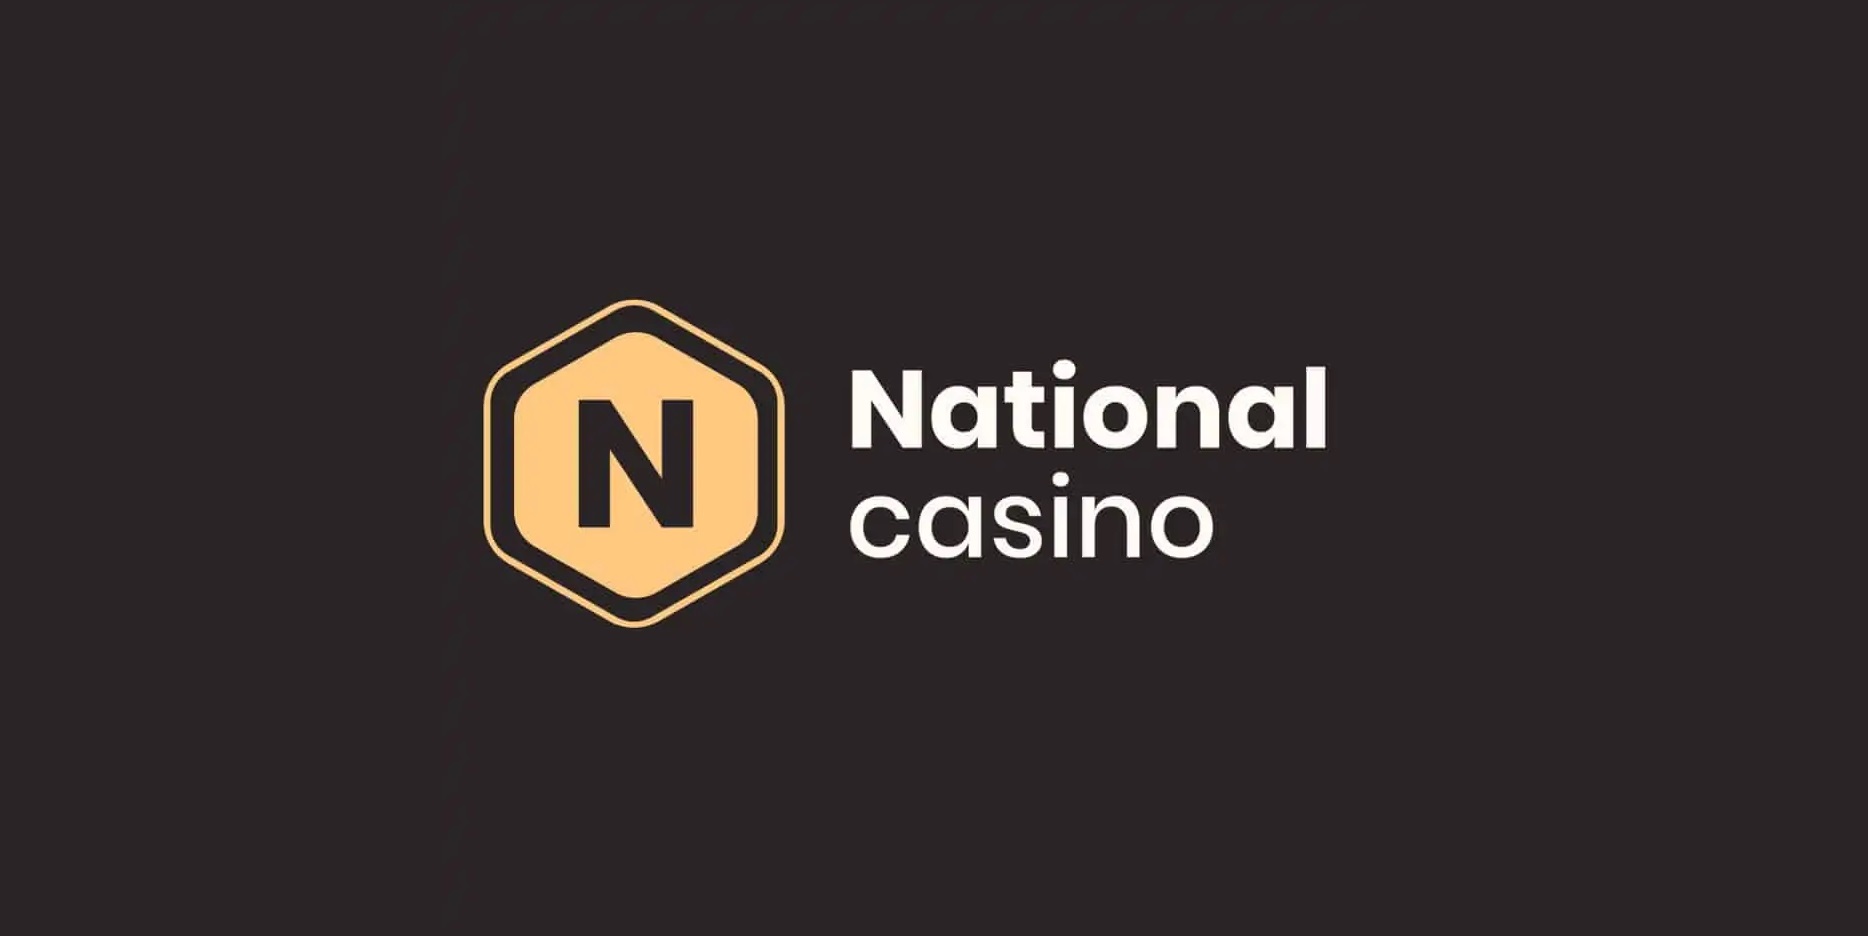 National Casino offers real money for real players.